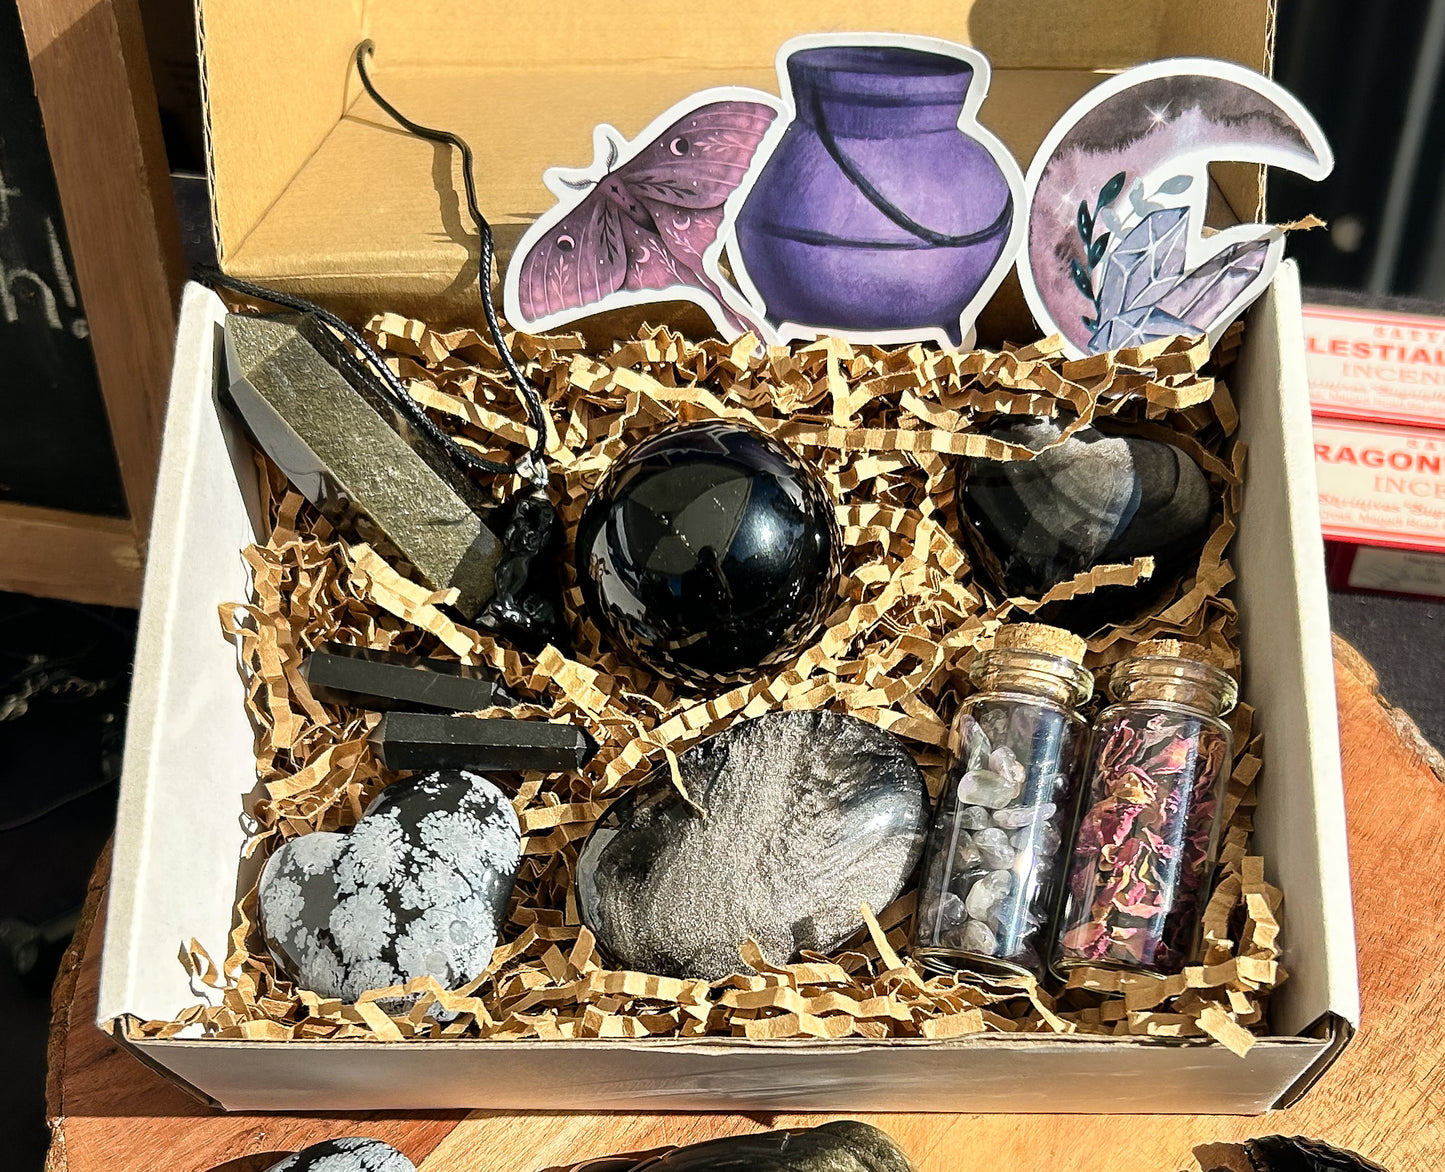 The "Crystal of the Month Club" Box